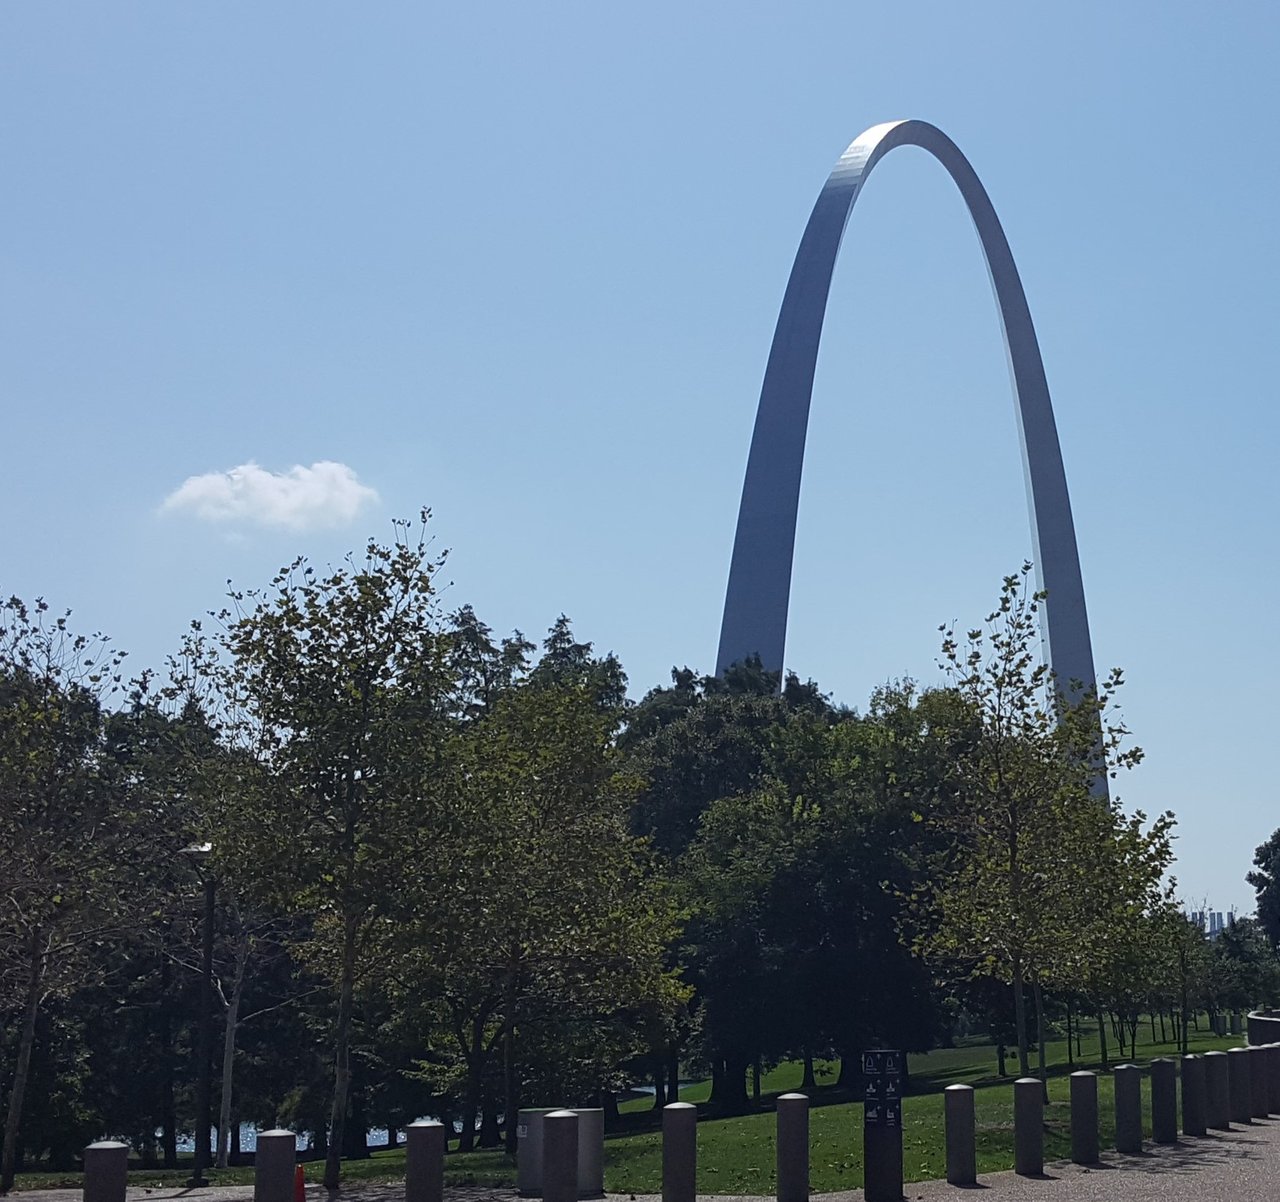 Looking Back at ST Louis - A Place to See When Travel Restrictions are Lifted